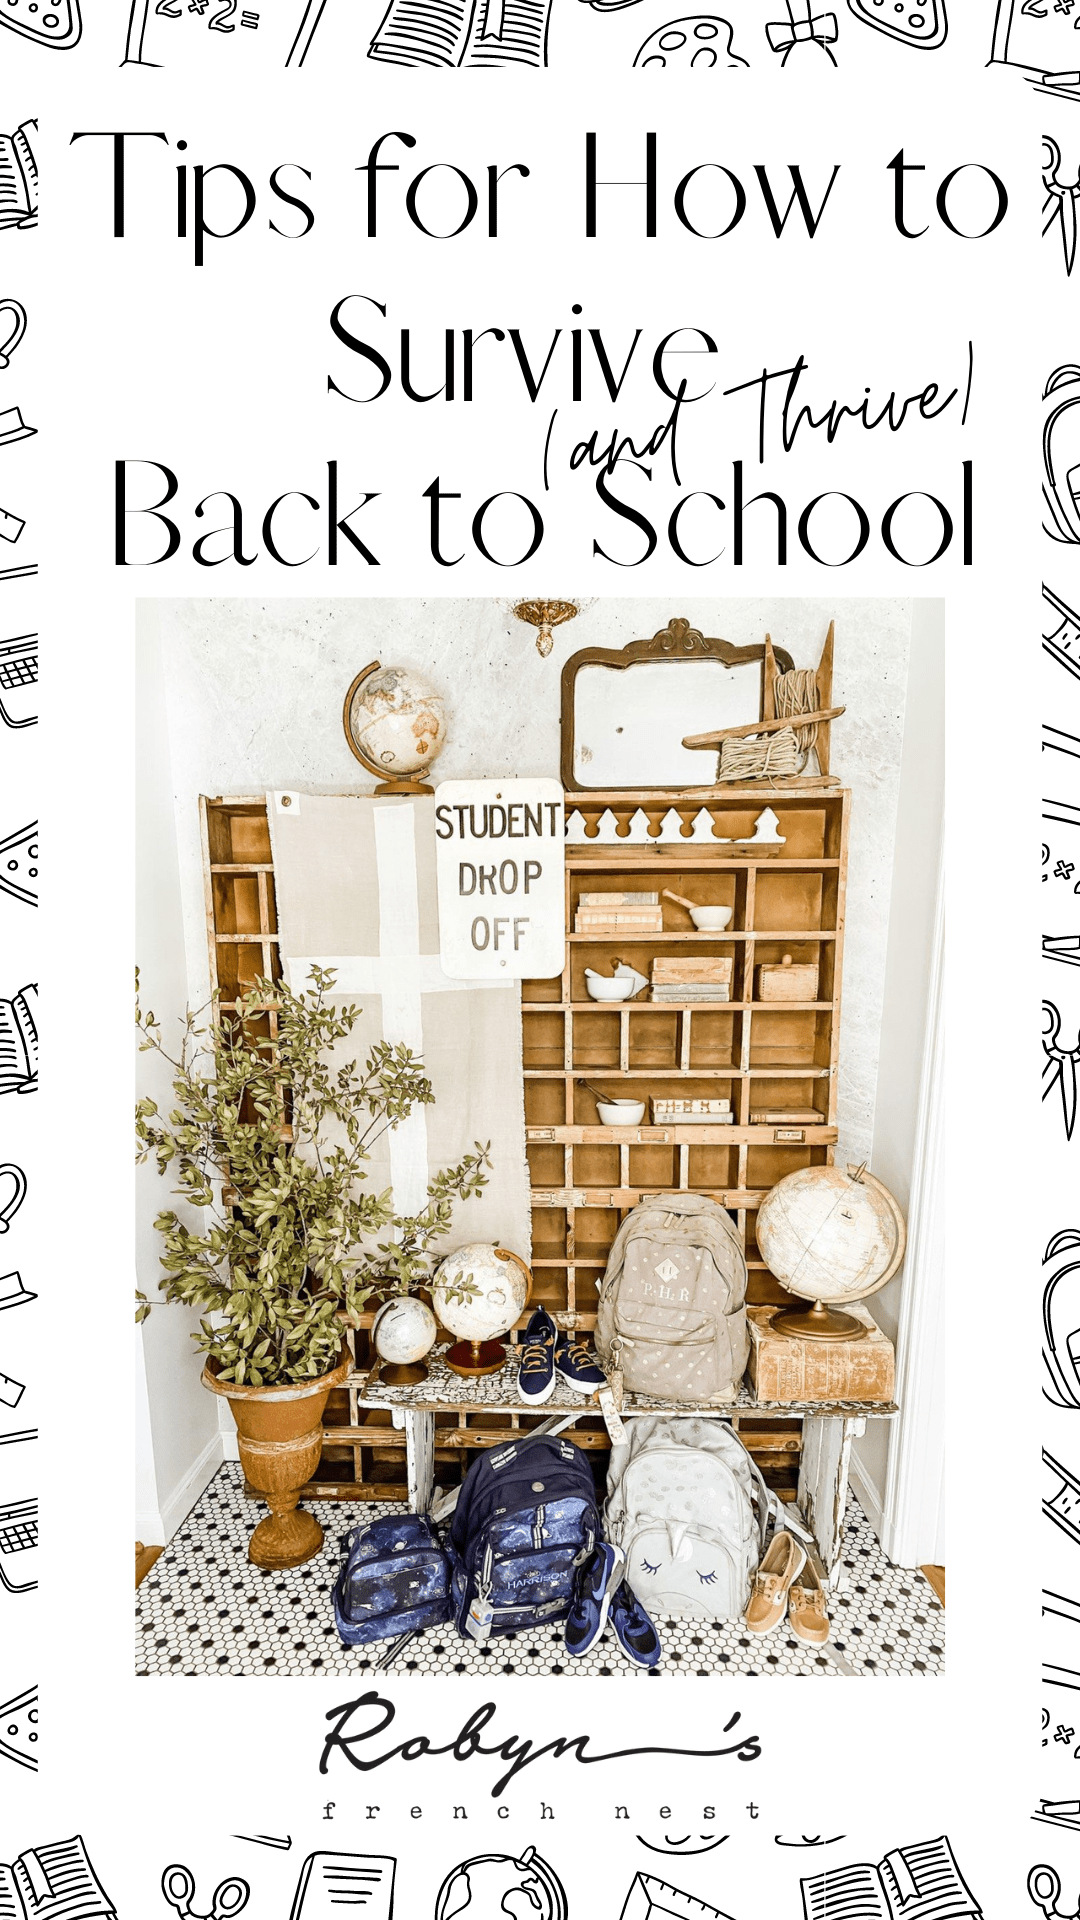 Pinterst cover sheet for How to survive back to school post